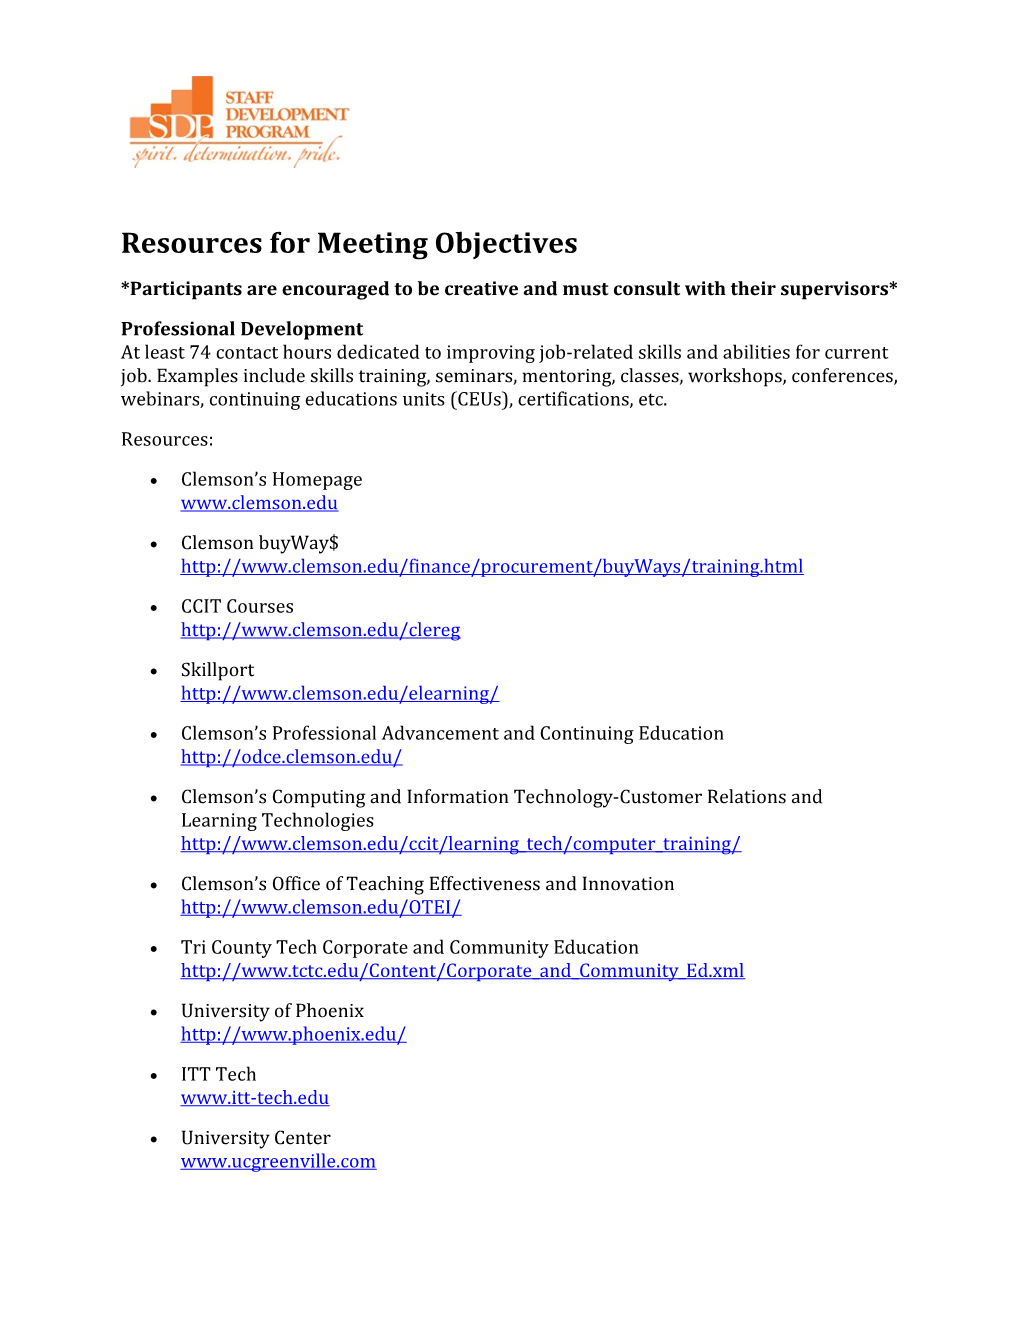 Resources for Meeting Objectives